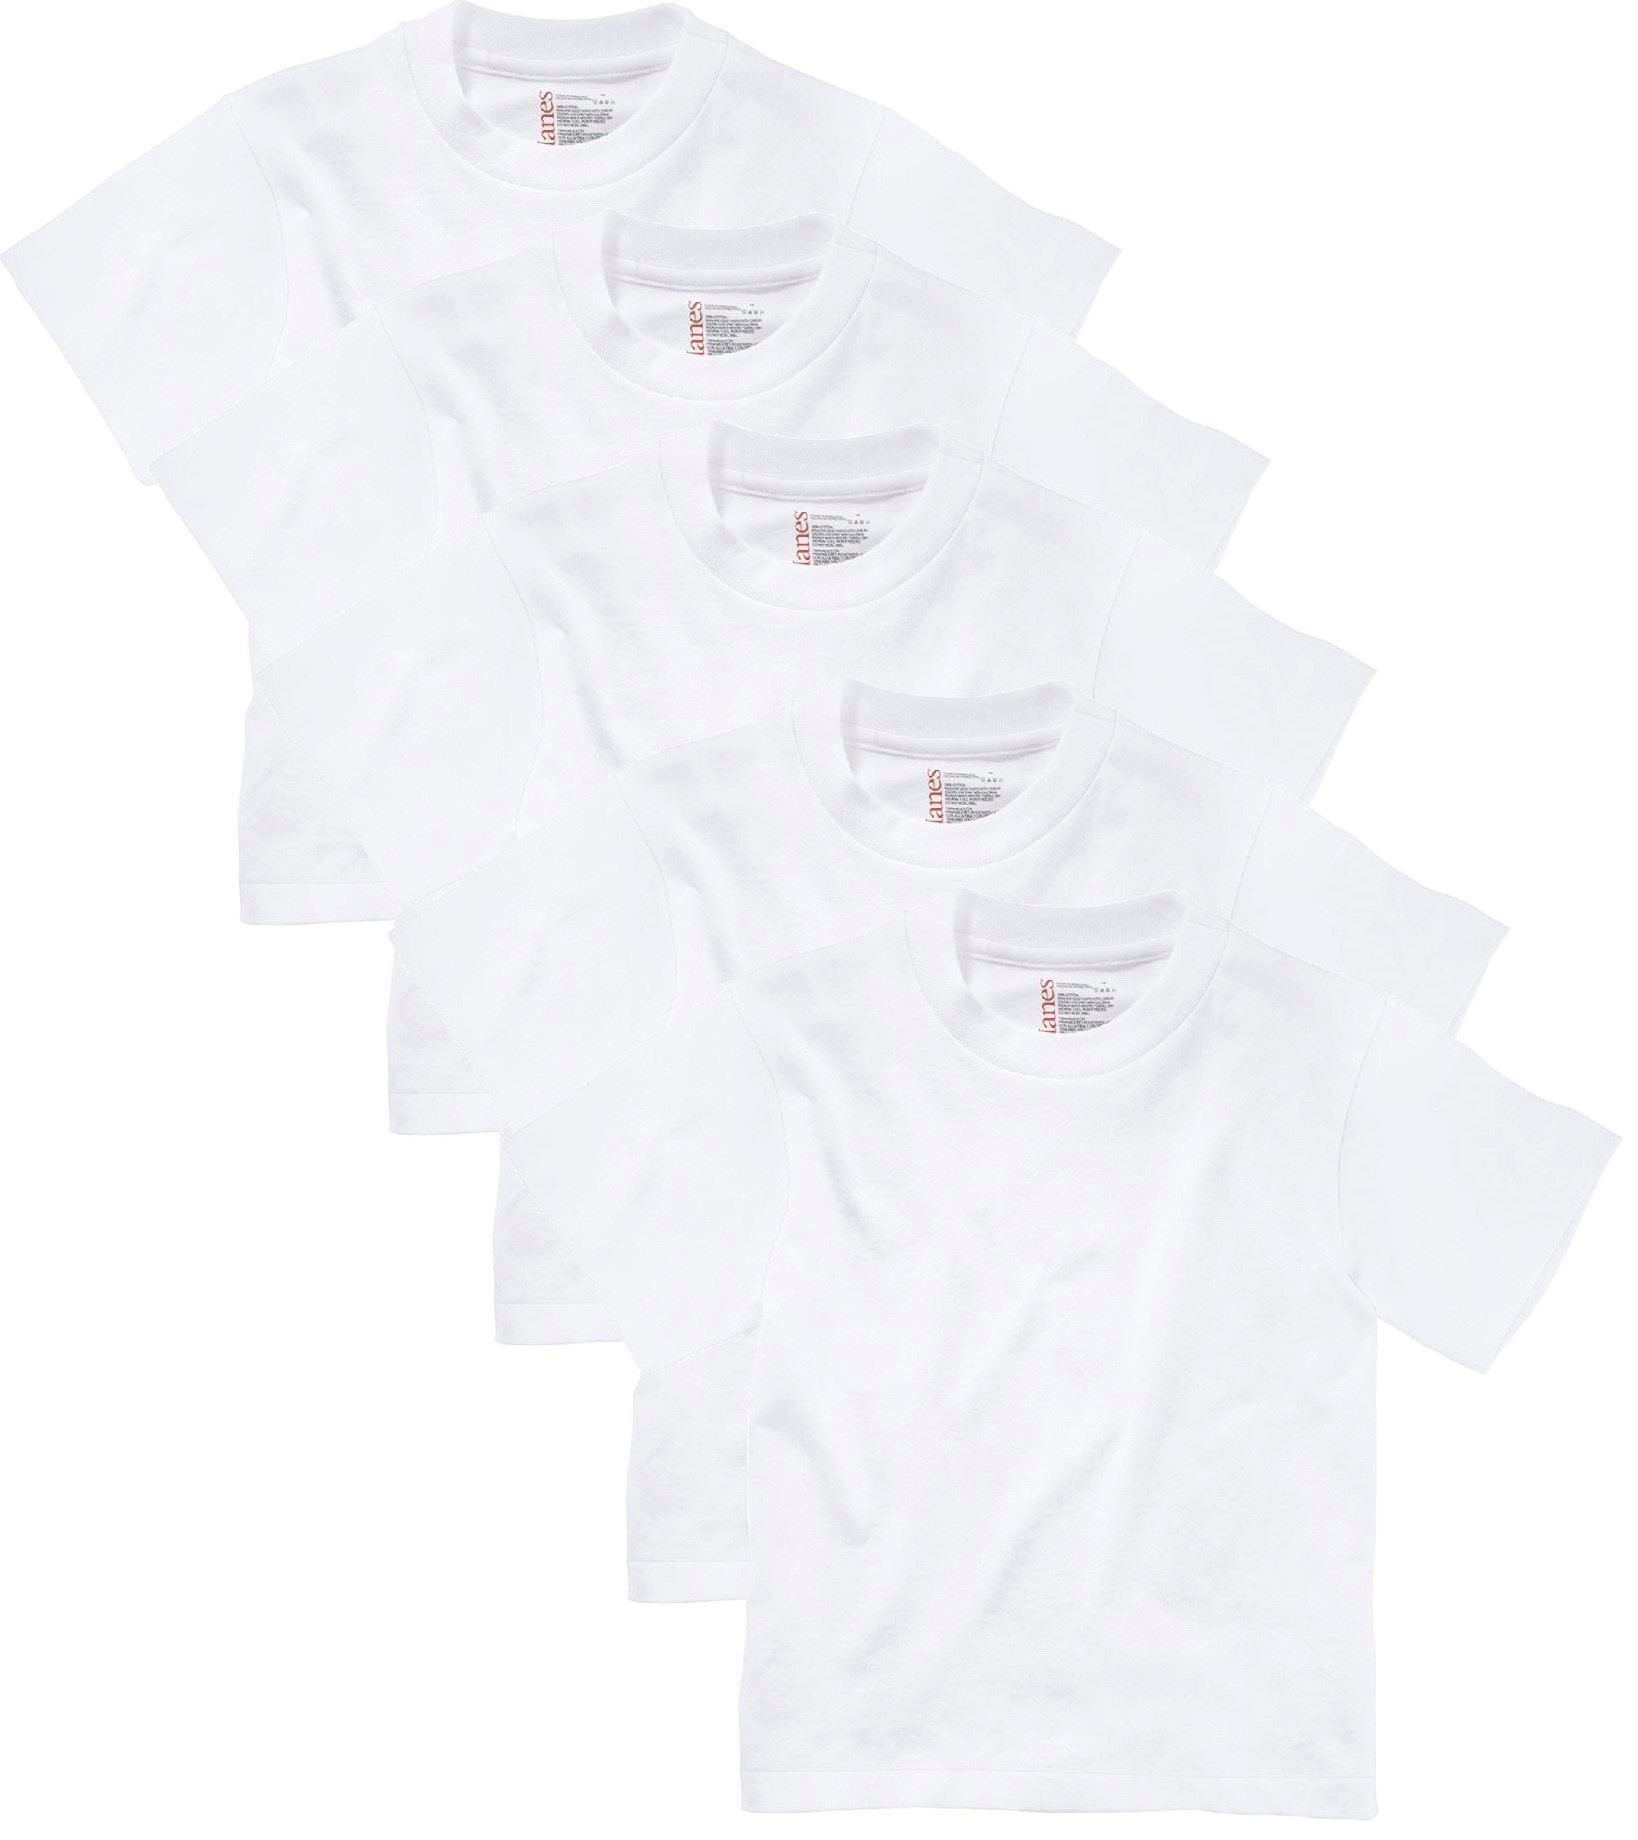 Hanes Toddler Boy Crew Undershirt, 5 Pack, Sizes 2T-5T - image 1 of 4